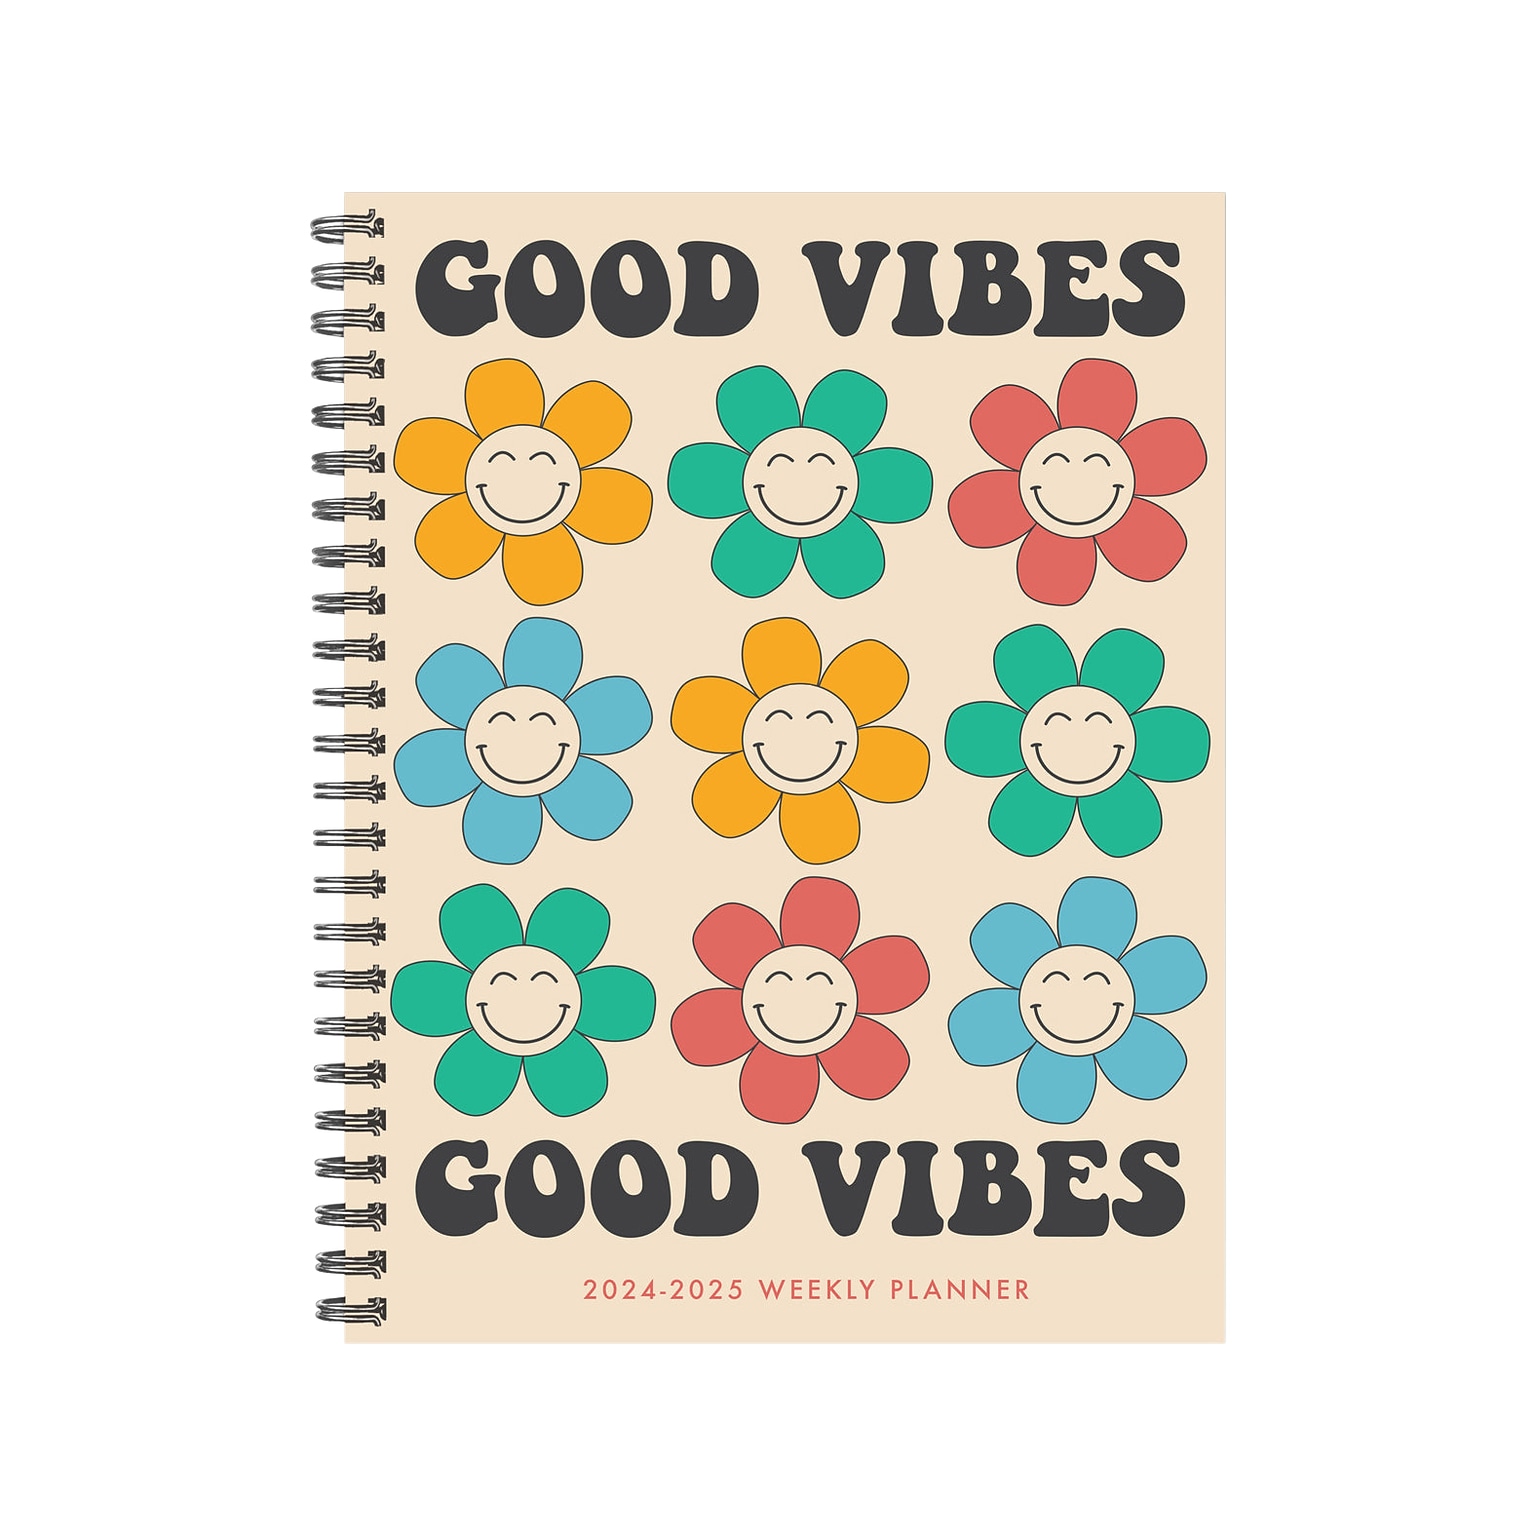 2024-2025 Willow Creek Good Vibes 6.5 x 8.5 Academic Weekly & Monthly Planner, Paper Cover, Multicolor (46241)